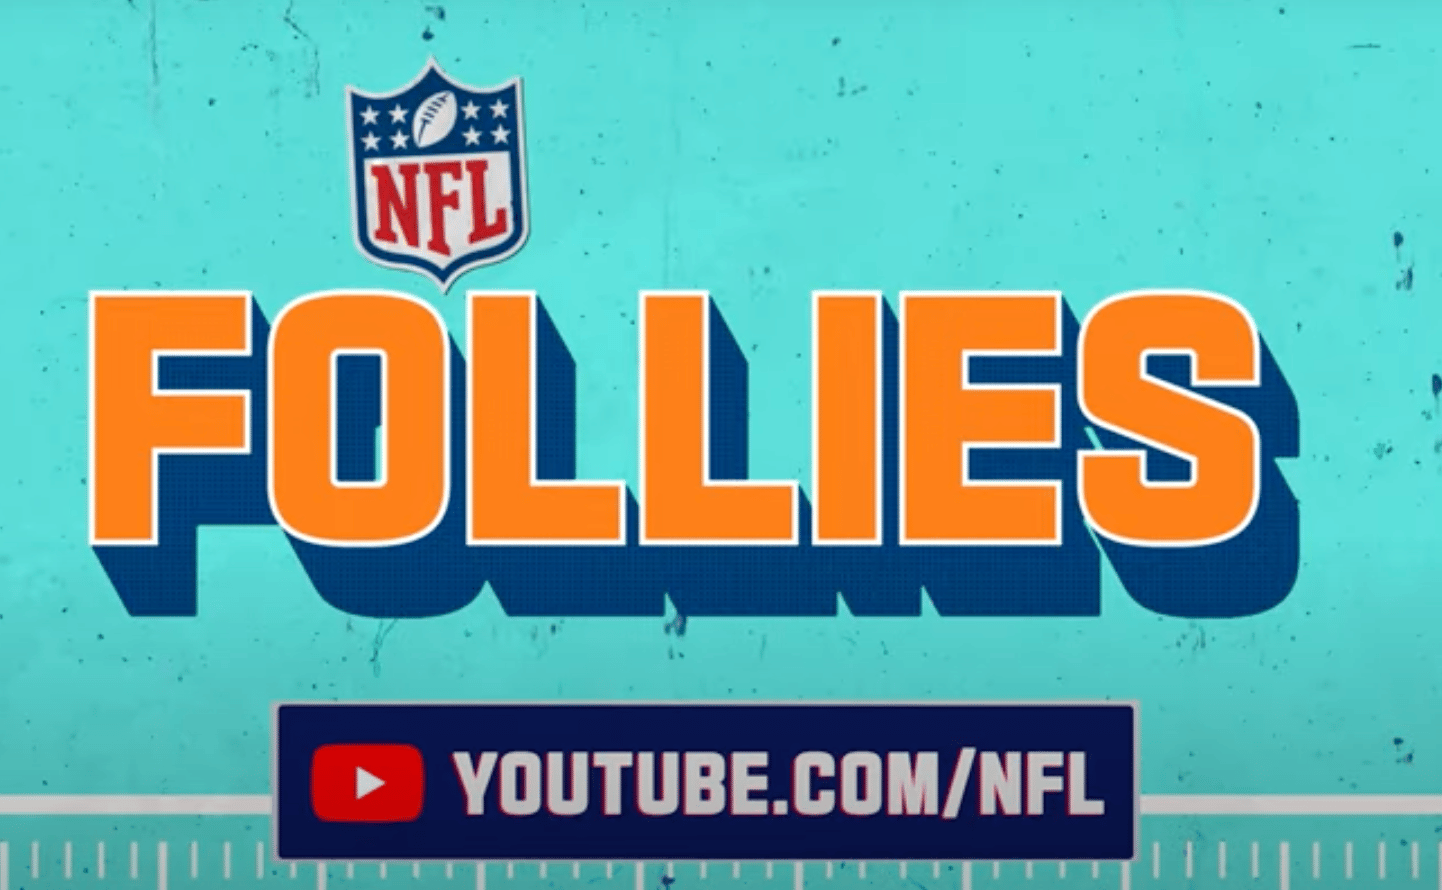 Nfl media launches second original series nfl follies exclusively on youtube